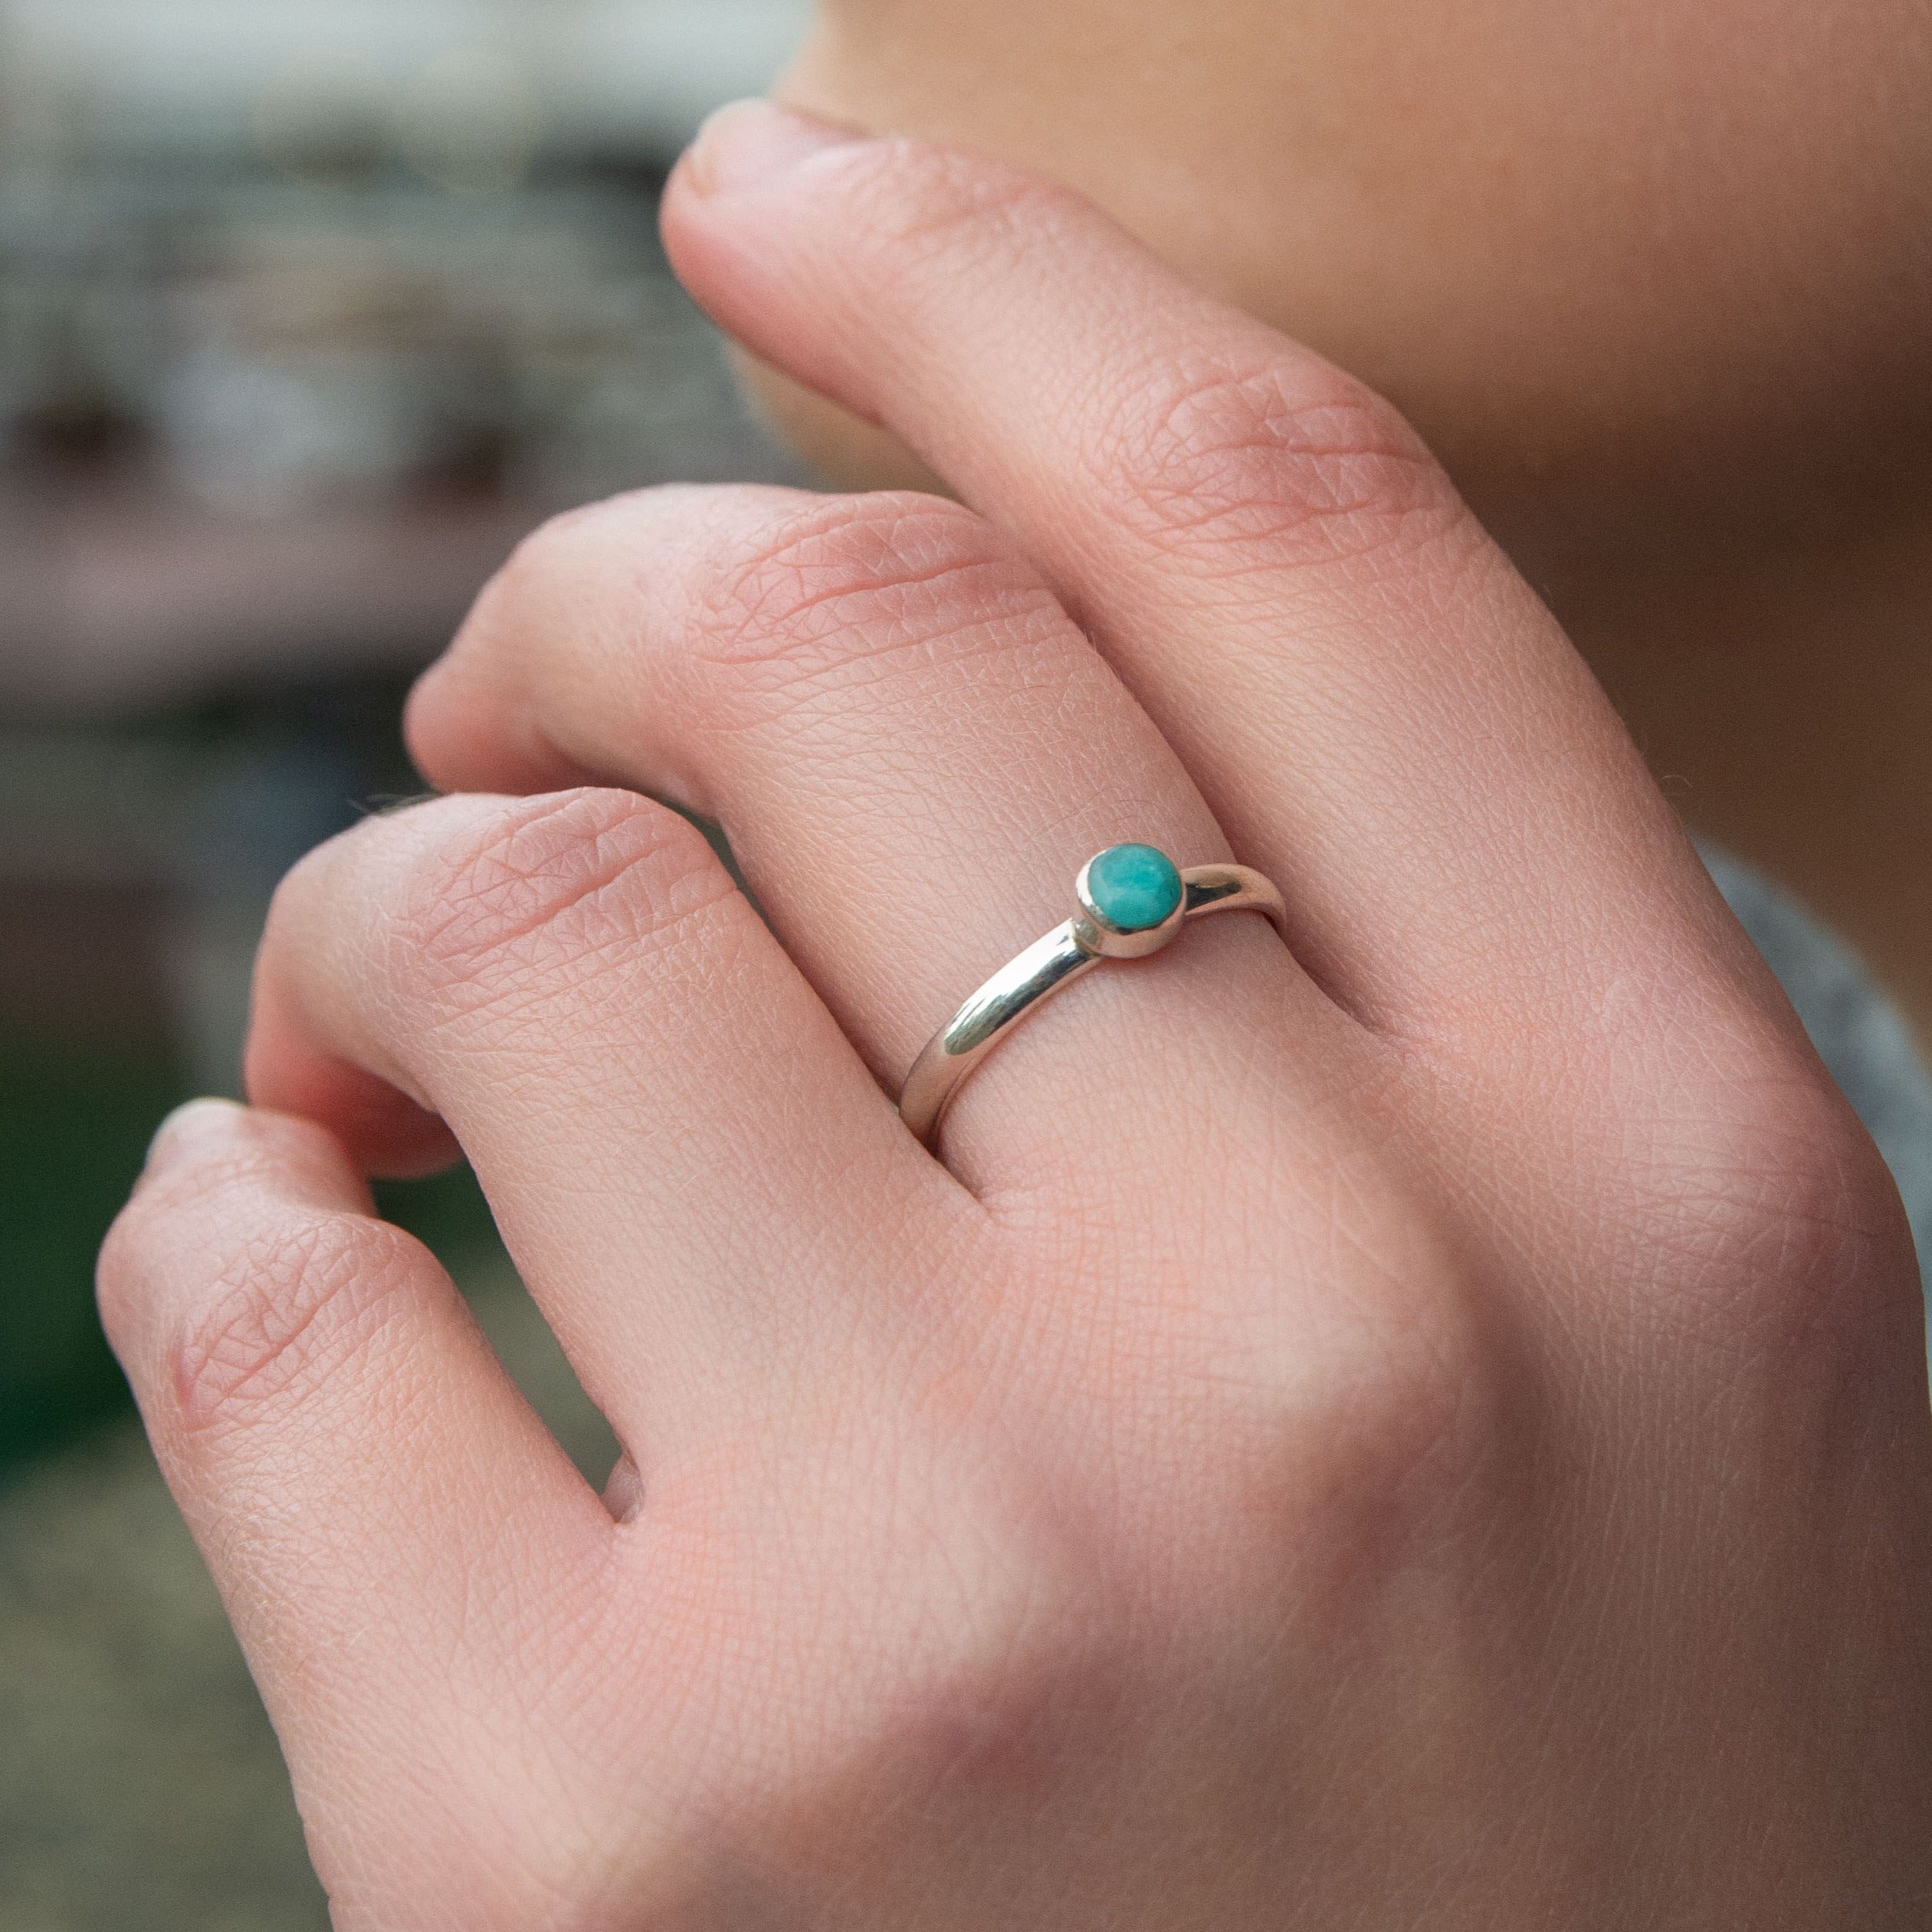 Round amazonite and silver 950 adjustable ring